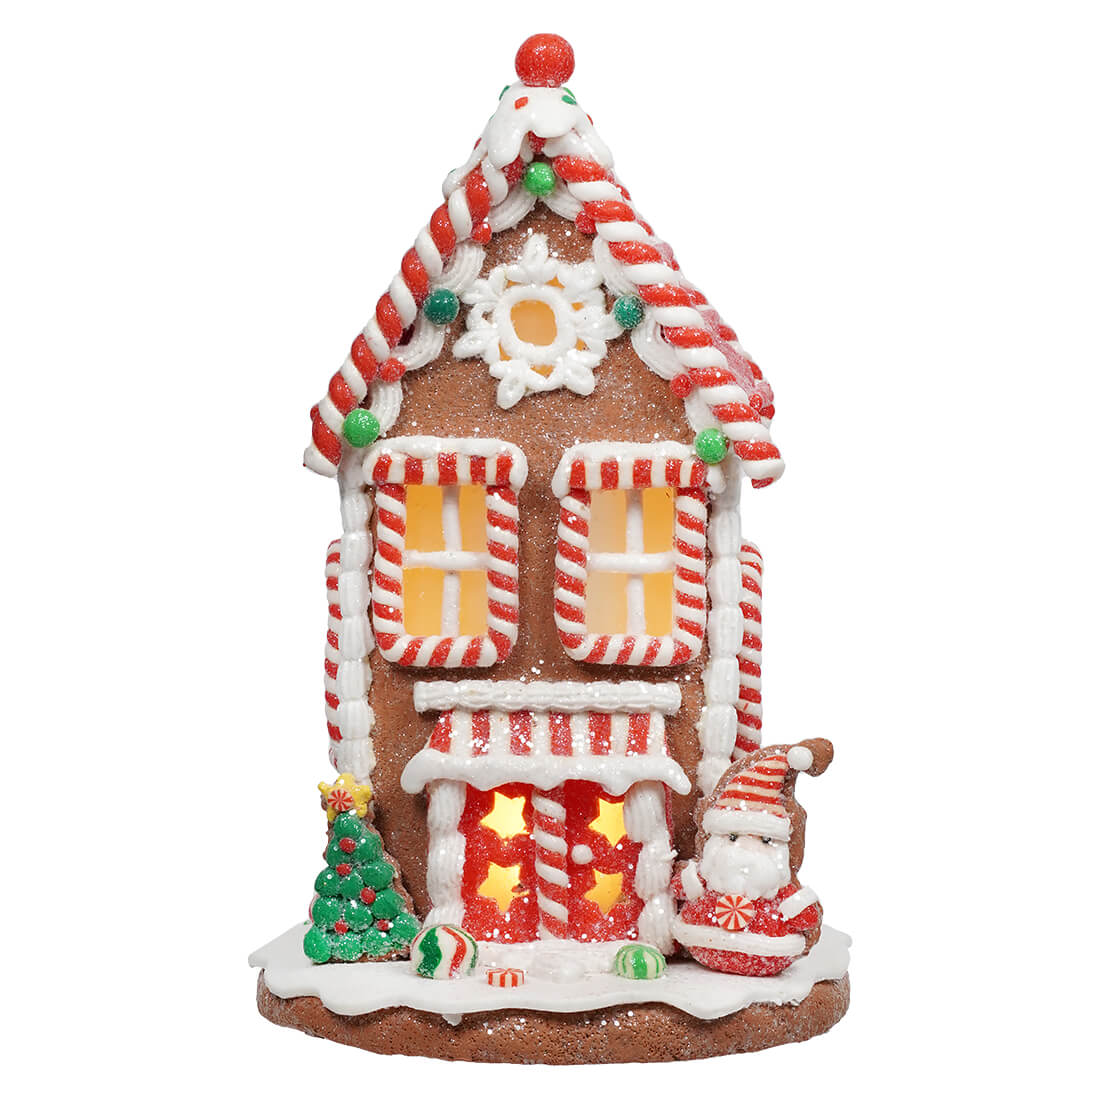 Lighted Claydough Holiday Gingerbread House With Santa